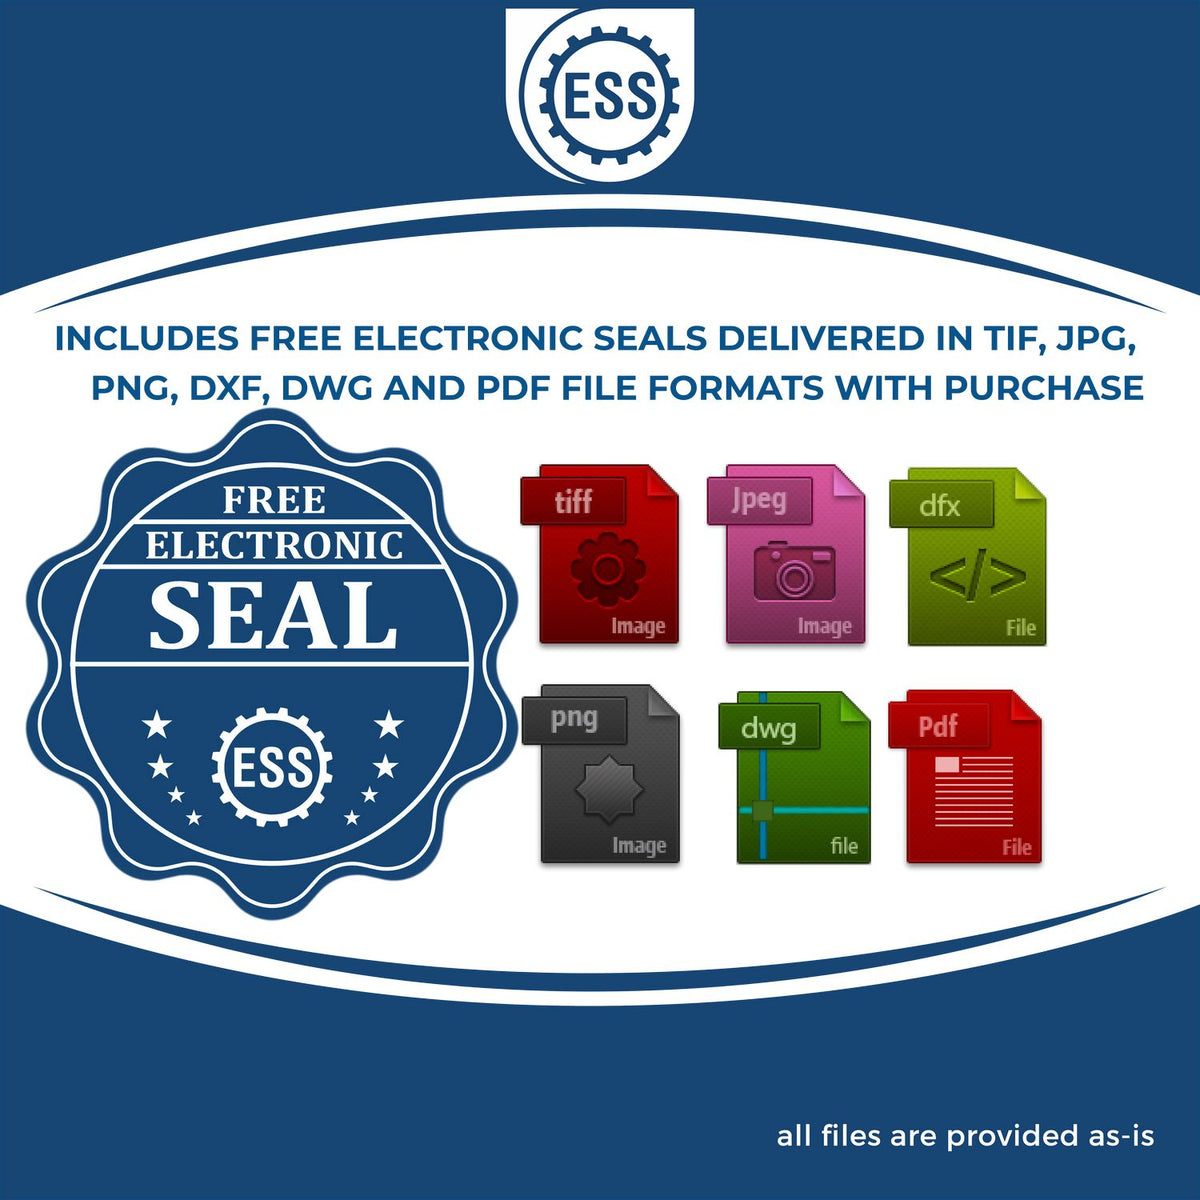 An infographic for the free electronic seal for the Gift Kansas Geologist Seal illustrating the different file type icons such as DXF, DWG, TIF, JPG and PNG.